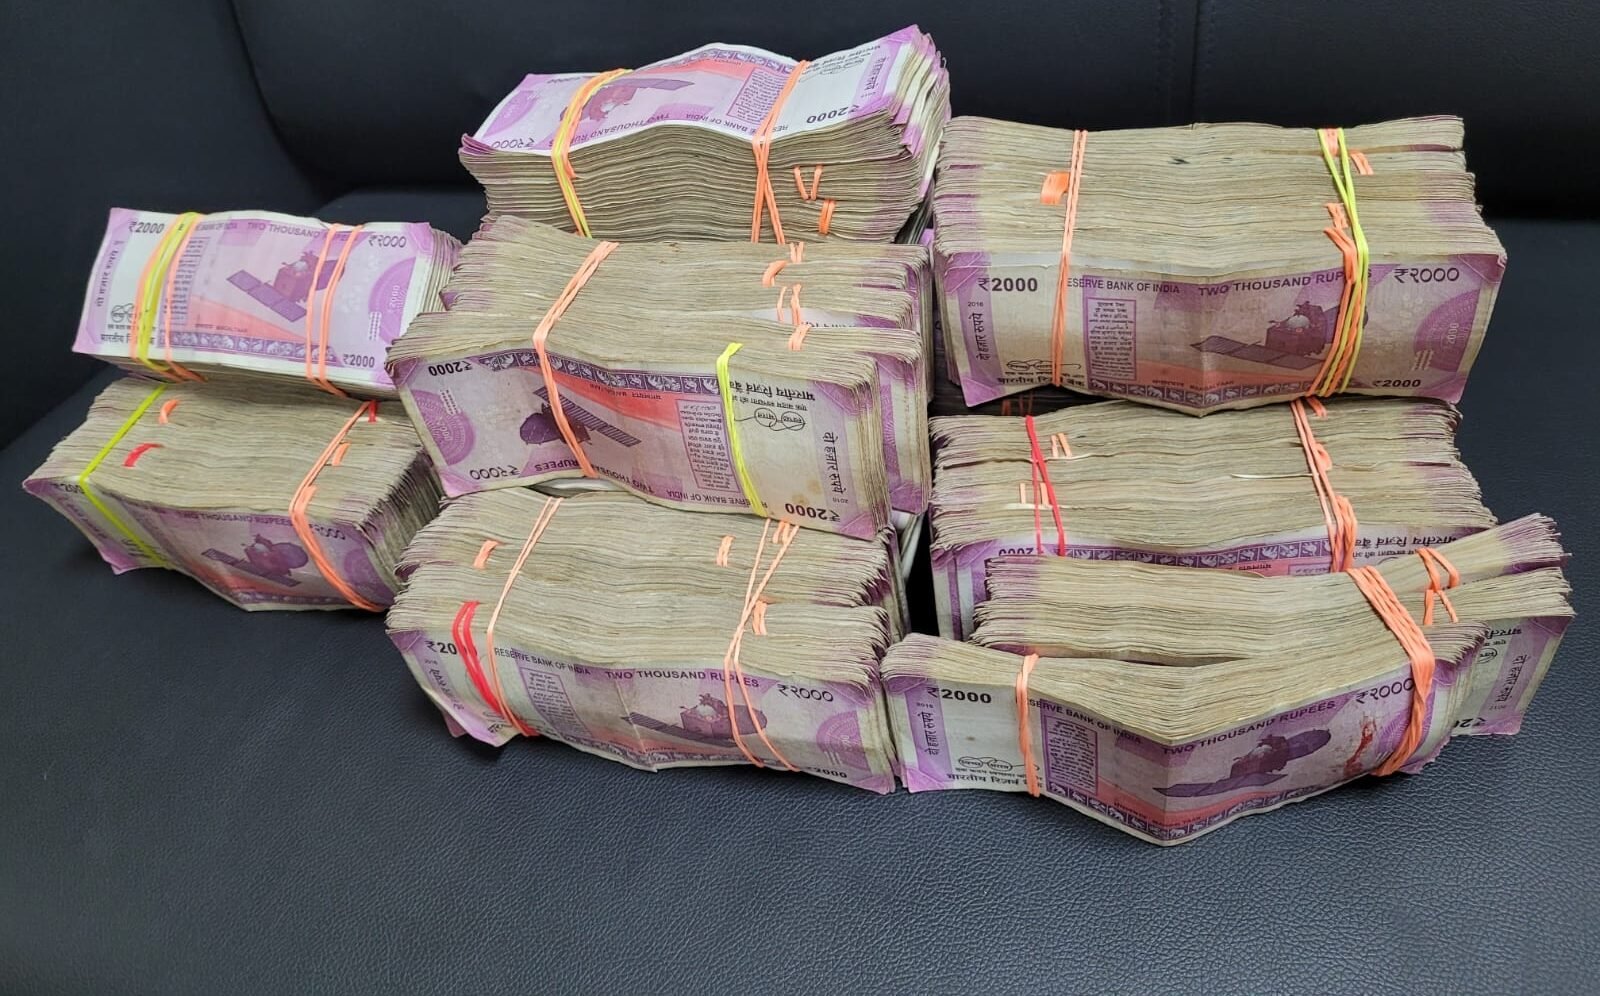 The Enforcement Directorate (ED) has seized Rs one Crore from the house of a businessman in Delhi in Delhi's Excise Policy Scam